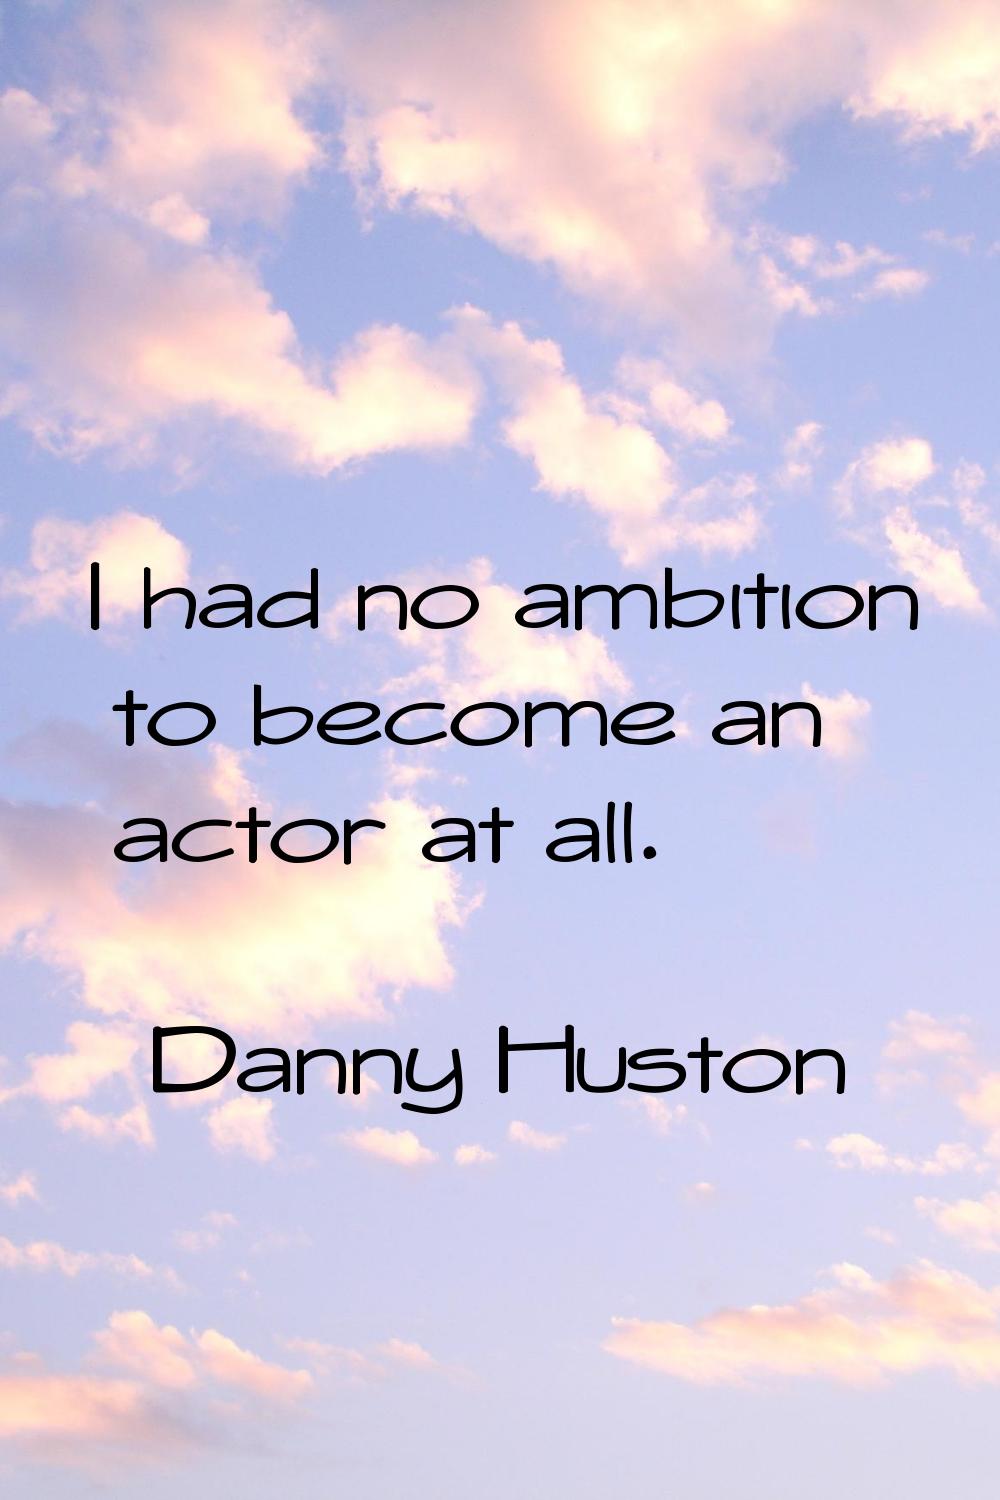 I had no ambition to become an actor at all.